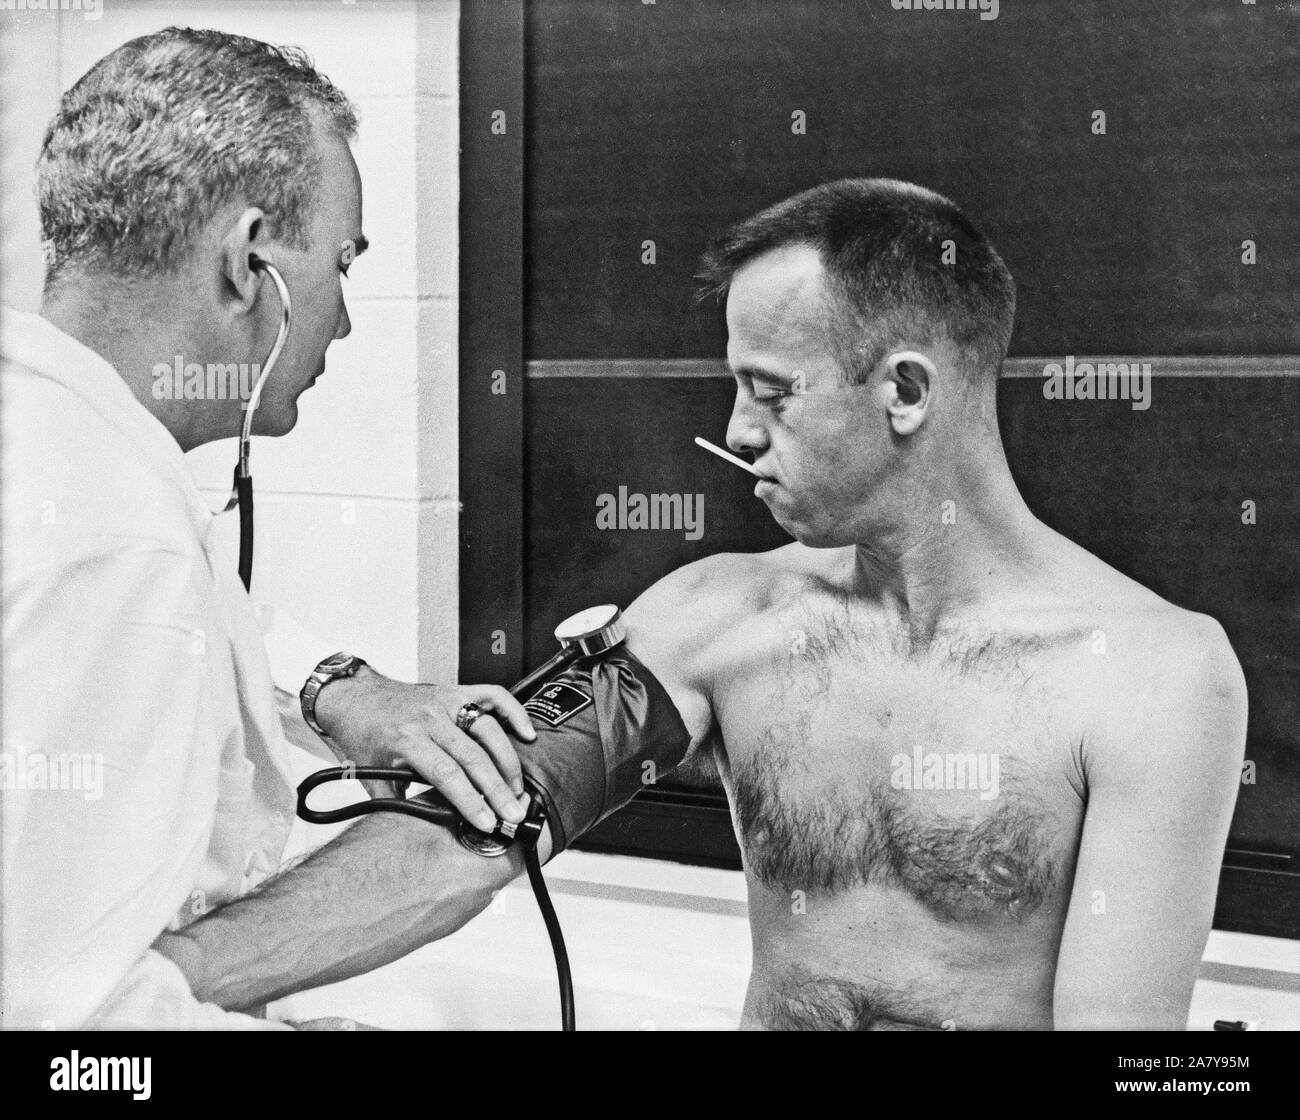 Astronaut Alan B. Shepard Jr. has his blood pressure and temperature checked prior to his Mercury-Redstone 3 (MR-3) mission, the first American manned spaceflight. Stock Photo